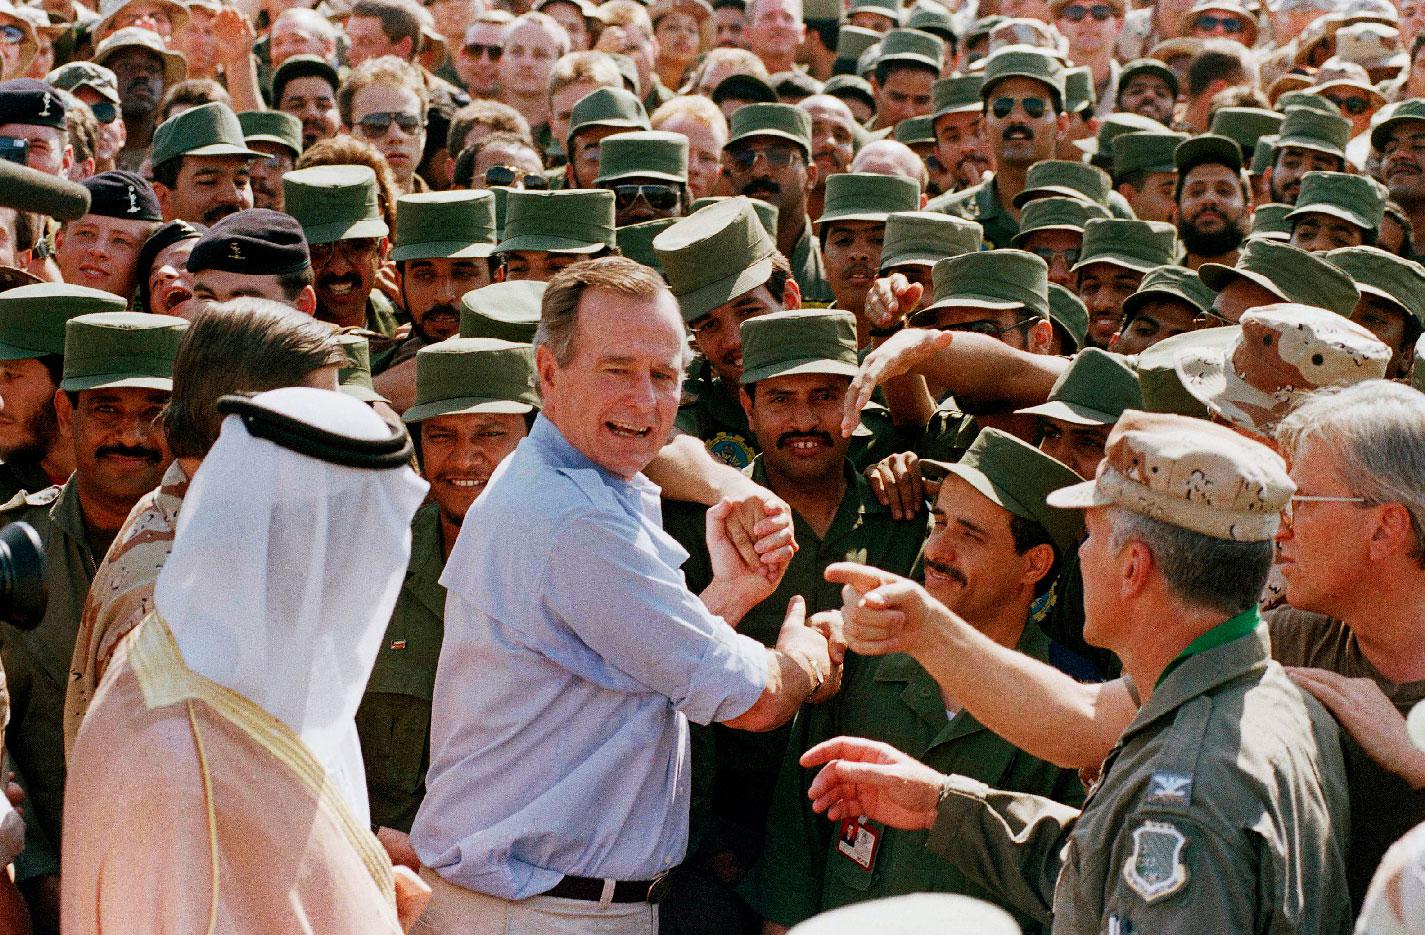 A file photo shows former US President George H.W. Bush being greeted by Saudi troops and others as he arrives in Dhahran, Saudi Arabia, in 1990.